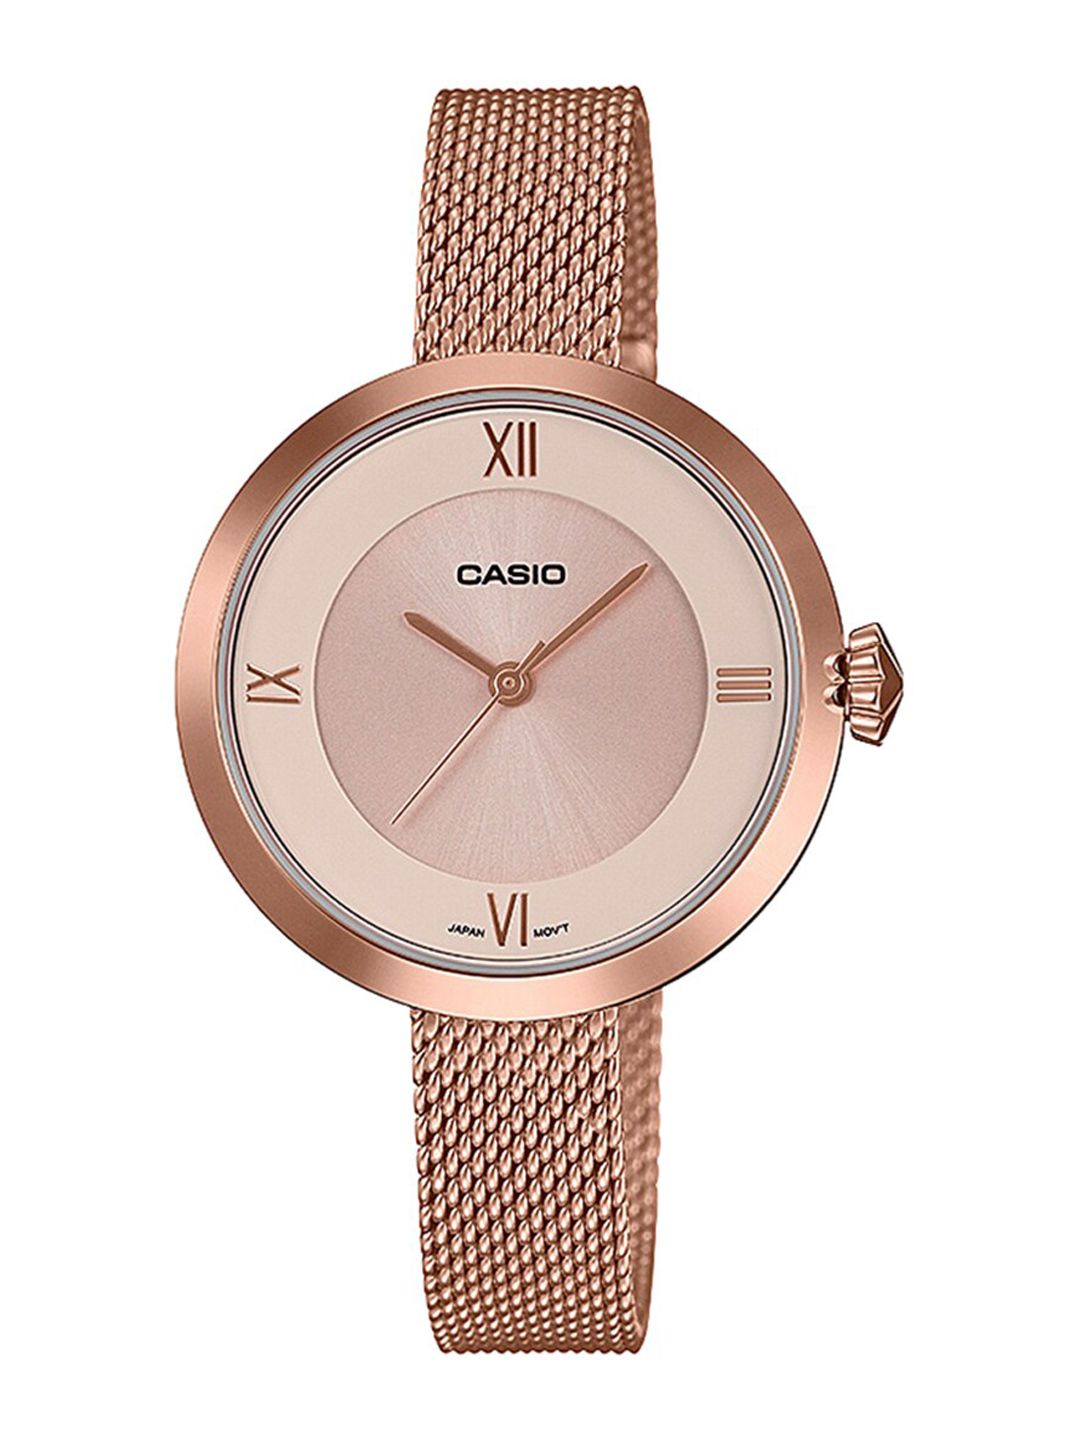 CASIO Women Rose Gold Analogue Watch Price in India